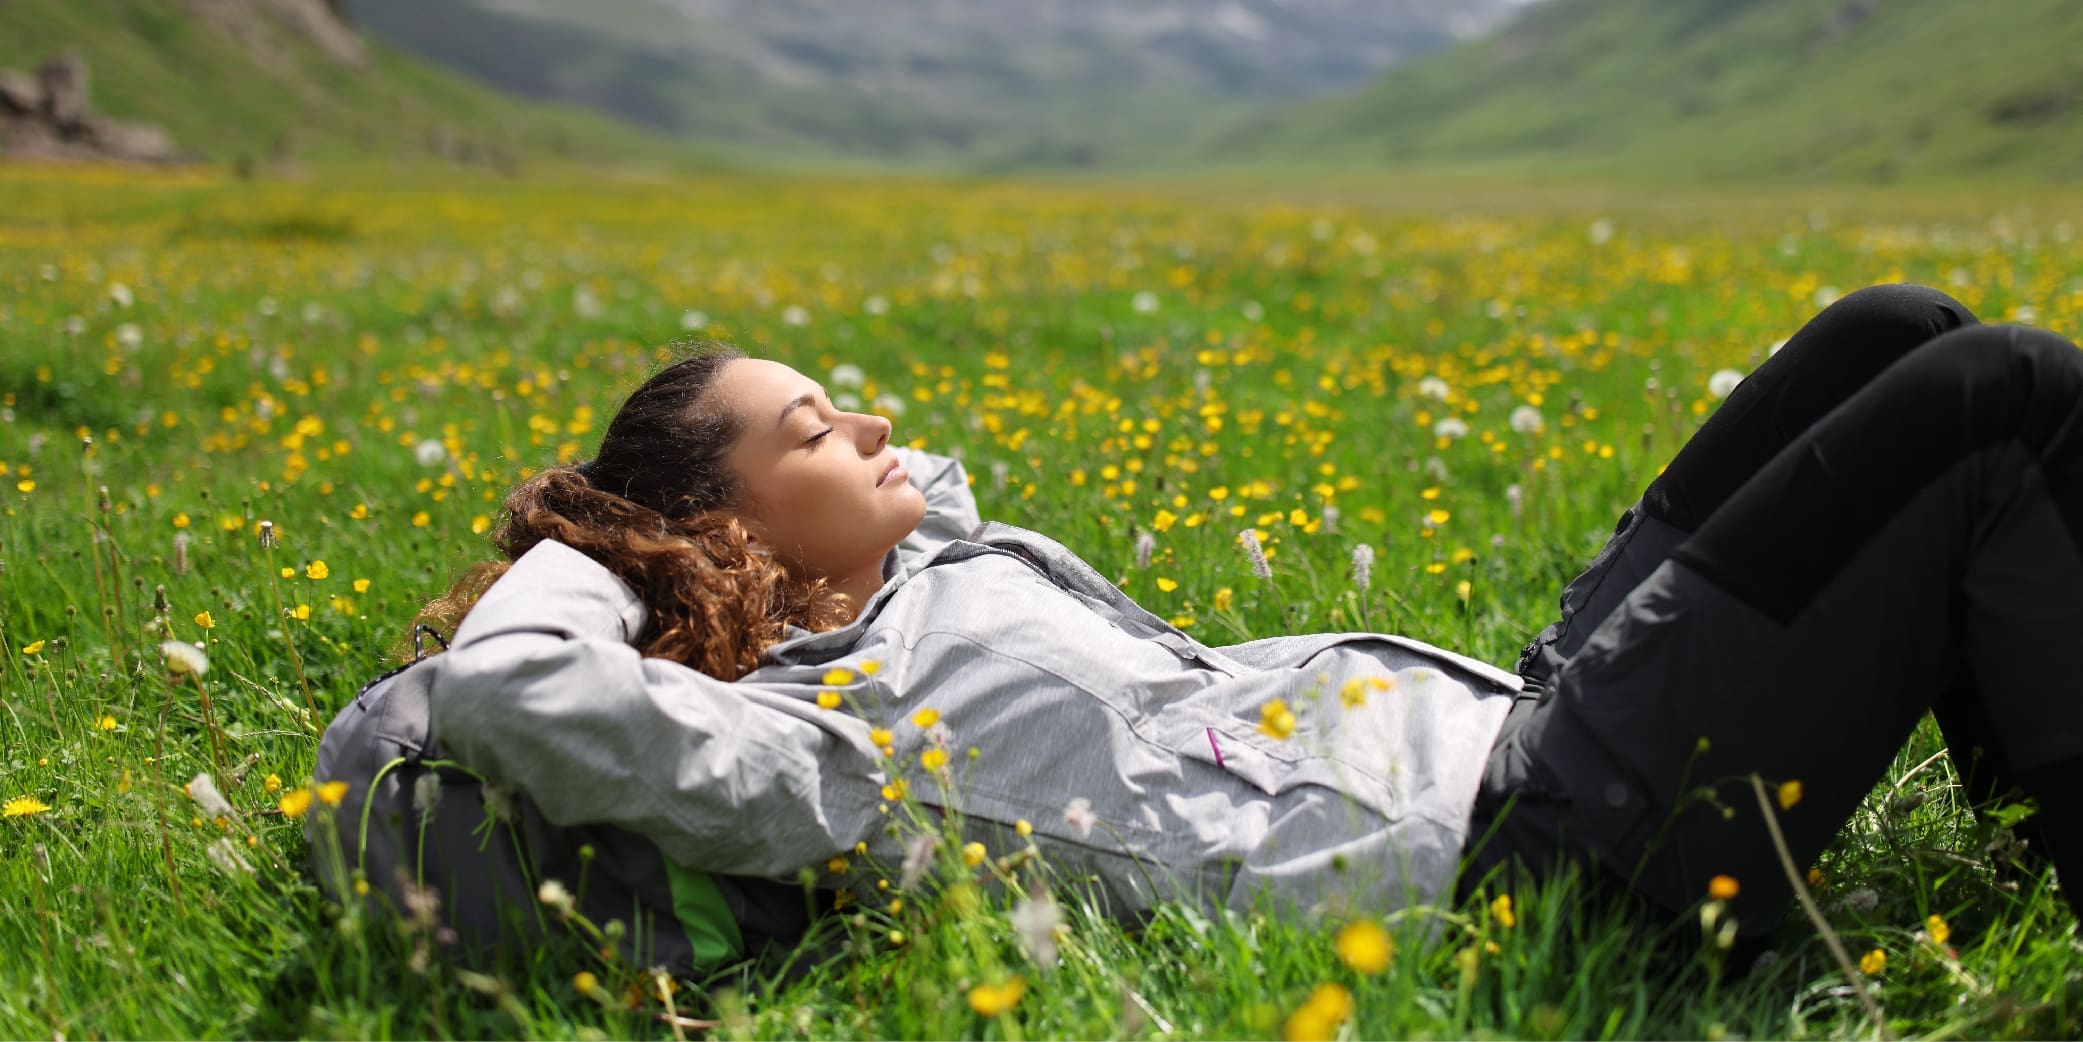 Girl laying on a grass field with flowers around.